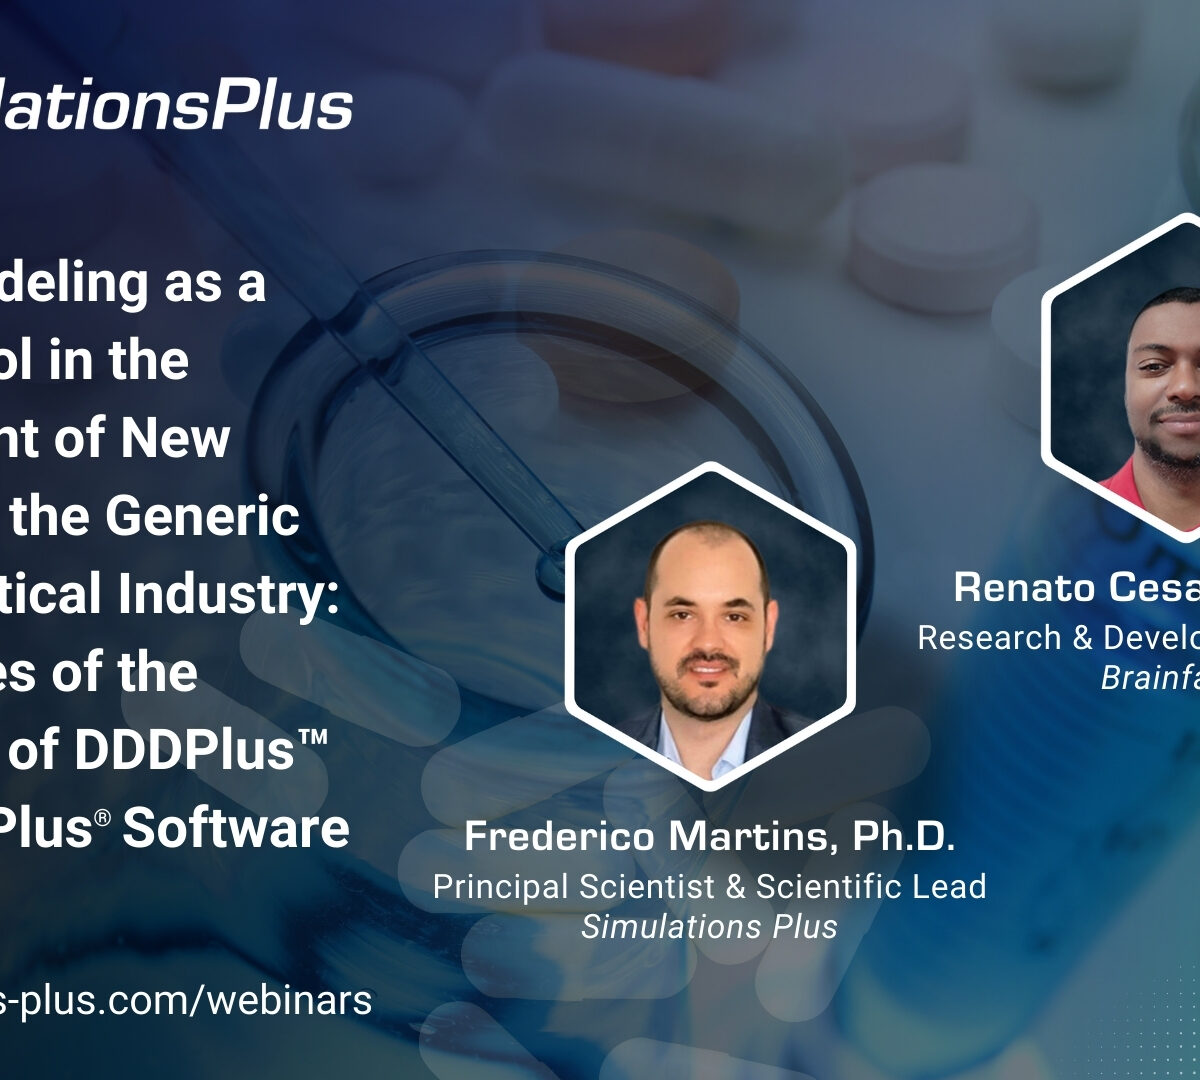 In silico modeling as a support tool in the development of new products in the generic pharmaceutical industry: case studies of the application of DDDPlus™ and GastroPlus® software